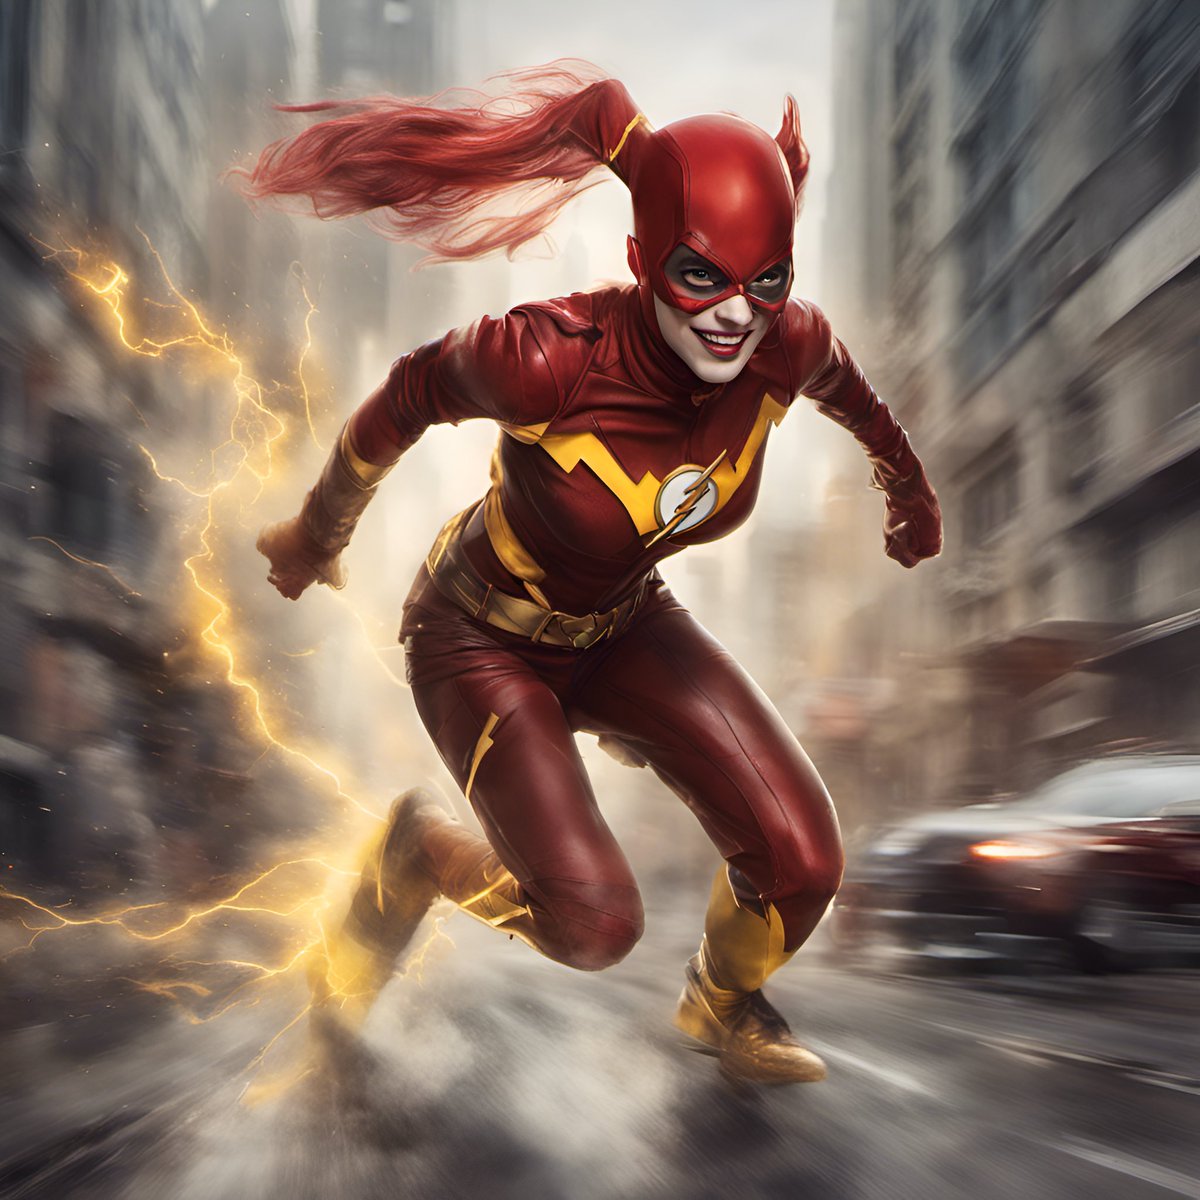 Today is #NationalHeroesDay so today I'm tryin' my hand at bein' a sexy speedster. Watch out world, fer one day only I'm...

HARLEY QUICK!!!